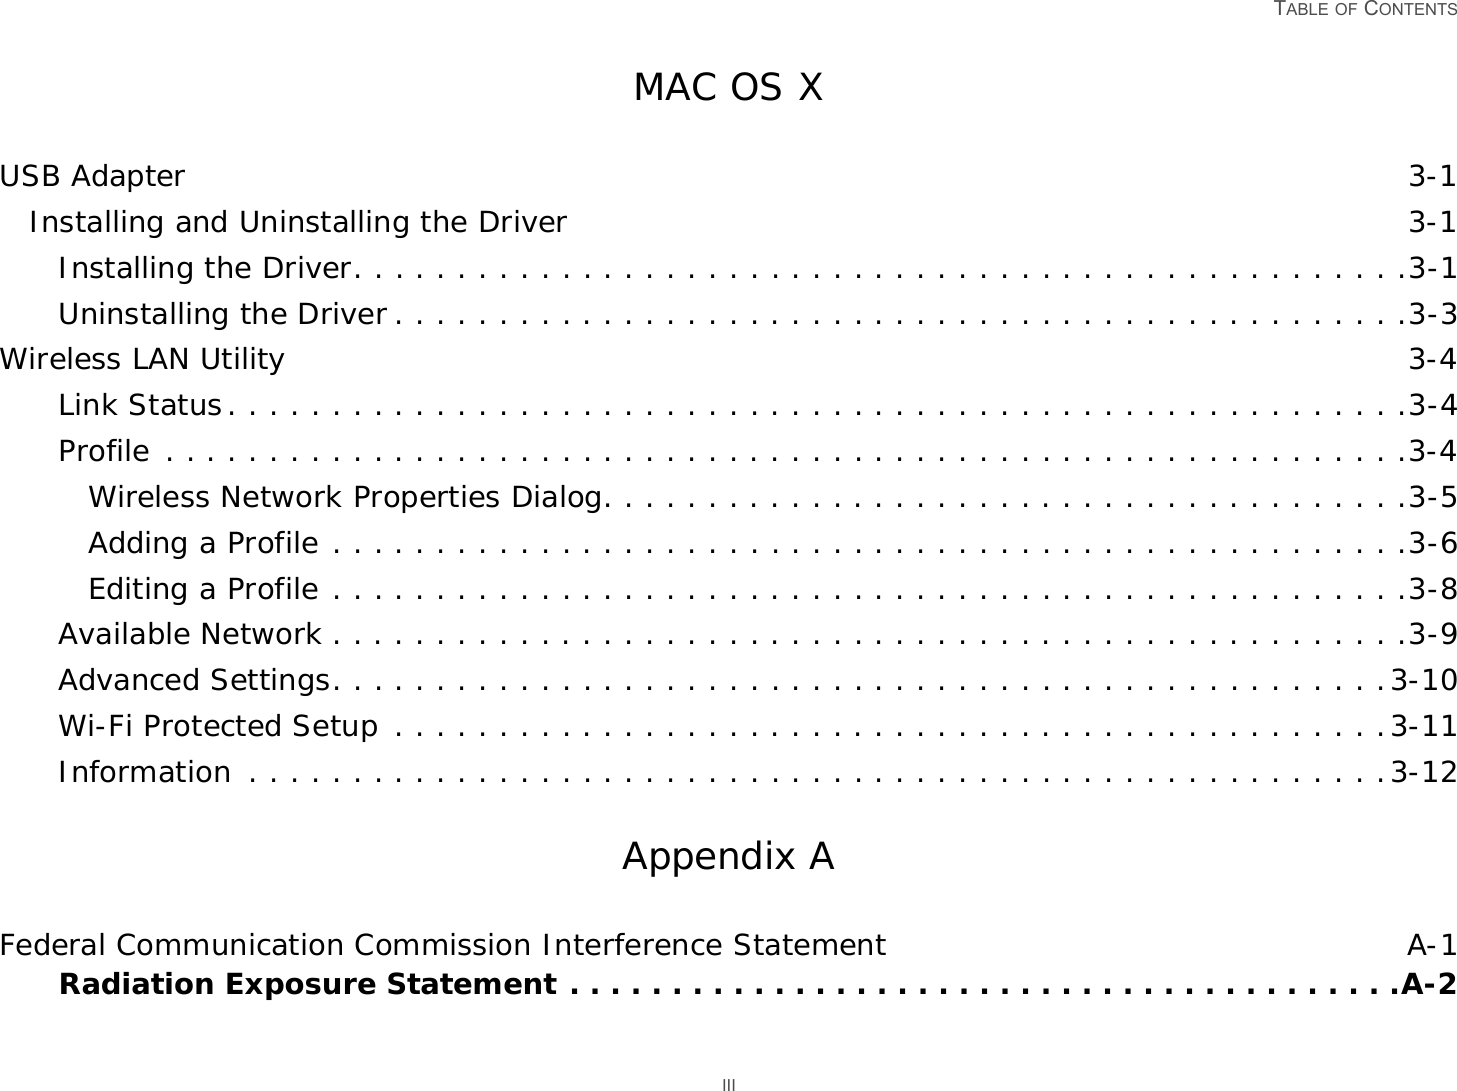 TABLE OF CONTENTS IIIMAC OS XUSB Adapter 3-1Installing and Uninstalling the Driver 3-1Installing the Driver. . . . . . . . . . . . . . . . . . . . . . . . . . . . . . . . . . . . . . . . . . . . . . . . . . .3-1Uninstalling the Driver . . . . . . . . . . . . . . . . . . . . . . . . . . . . . . . . . . . . . . . . . . . . . . . . .3-3Wireless LAN Utility 3-4Link Status. . . . . . . . . . . . . . . . . . . . . . . . . . . . . . . . . . . . . . . . . . . . . . . . . . . . . . . . .3-4Profile . . . . . . . . . . . . . . . . . . . . . . . . . . . . . . . . . . . . . . . . . . . . . . . . . . . . . . . . . . . .3-4Wireless Network Properties Dialog. . . . . . . . . . . . . . . . . . . . . . . . . . . . . . . . . . . . . . .3-5Adding a Profile . . . . . . . . . . . . . . . . . . . . . . . . . . . . . . . . . . . . . . . . . . . . . . . . . . . .3-6Editing a Profile . . . . . . . . . . . . . . . . . . . . . . . . . . . . . . . . . . . . . . . . . . . . . . . . . . . .3-8Available Network . . . . . . . . . . . . . . . . . . . . . . . . . . . . . . . . . . . . . . . . . . . . . . . . . . . .3-9Advanced Settings. . . . . . . . . . . . . . . . . . . . . . . . . . . . . . . . . . . . . . . . . . . . . . . . . . .3-10Wi-Fi Protected Setup  . . . . . . . . . . . . . . . . . . . . . . . . . . . . . . . . . . . . . . . . . . . . . . . .3-11Information  . . . . . . . . . . . . . . . . . . . . . . . . . . . . . . . . . . . . . . . . . . . . . . . . . . . . . . .3-12Appendix AFederal Communication Commission Interference Statement A-1Radiation Exposure Statement . . . . . . . . . . . . . . . . . . . . . . . . . . . . . . . . . . . . . . . . .A-2